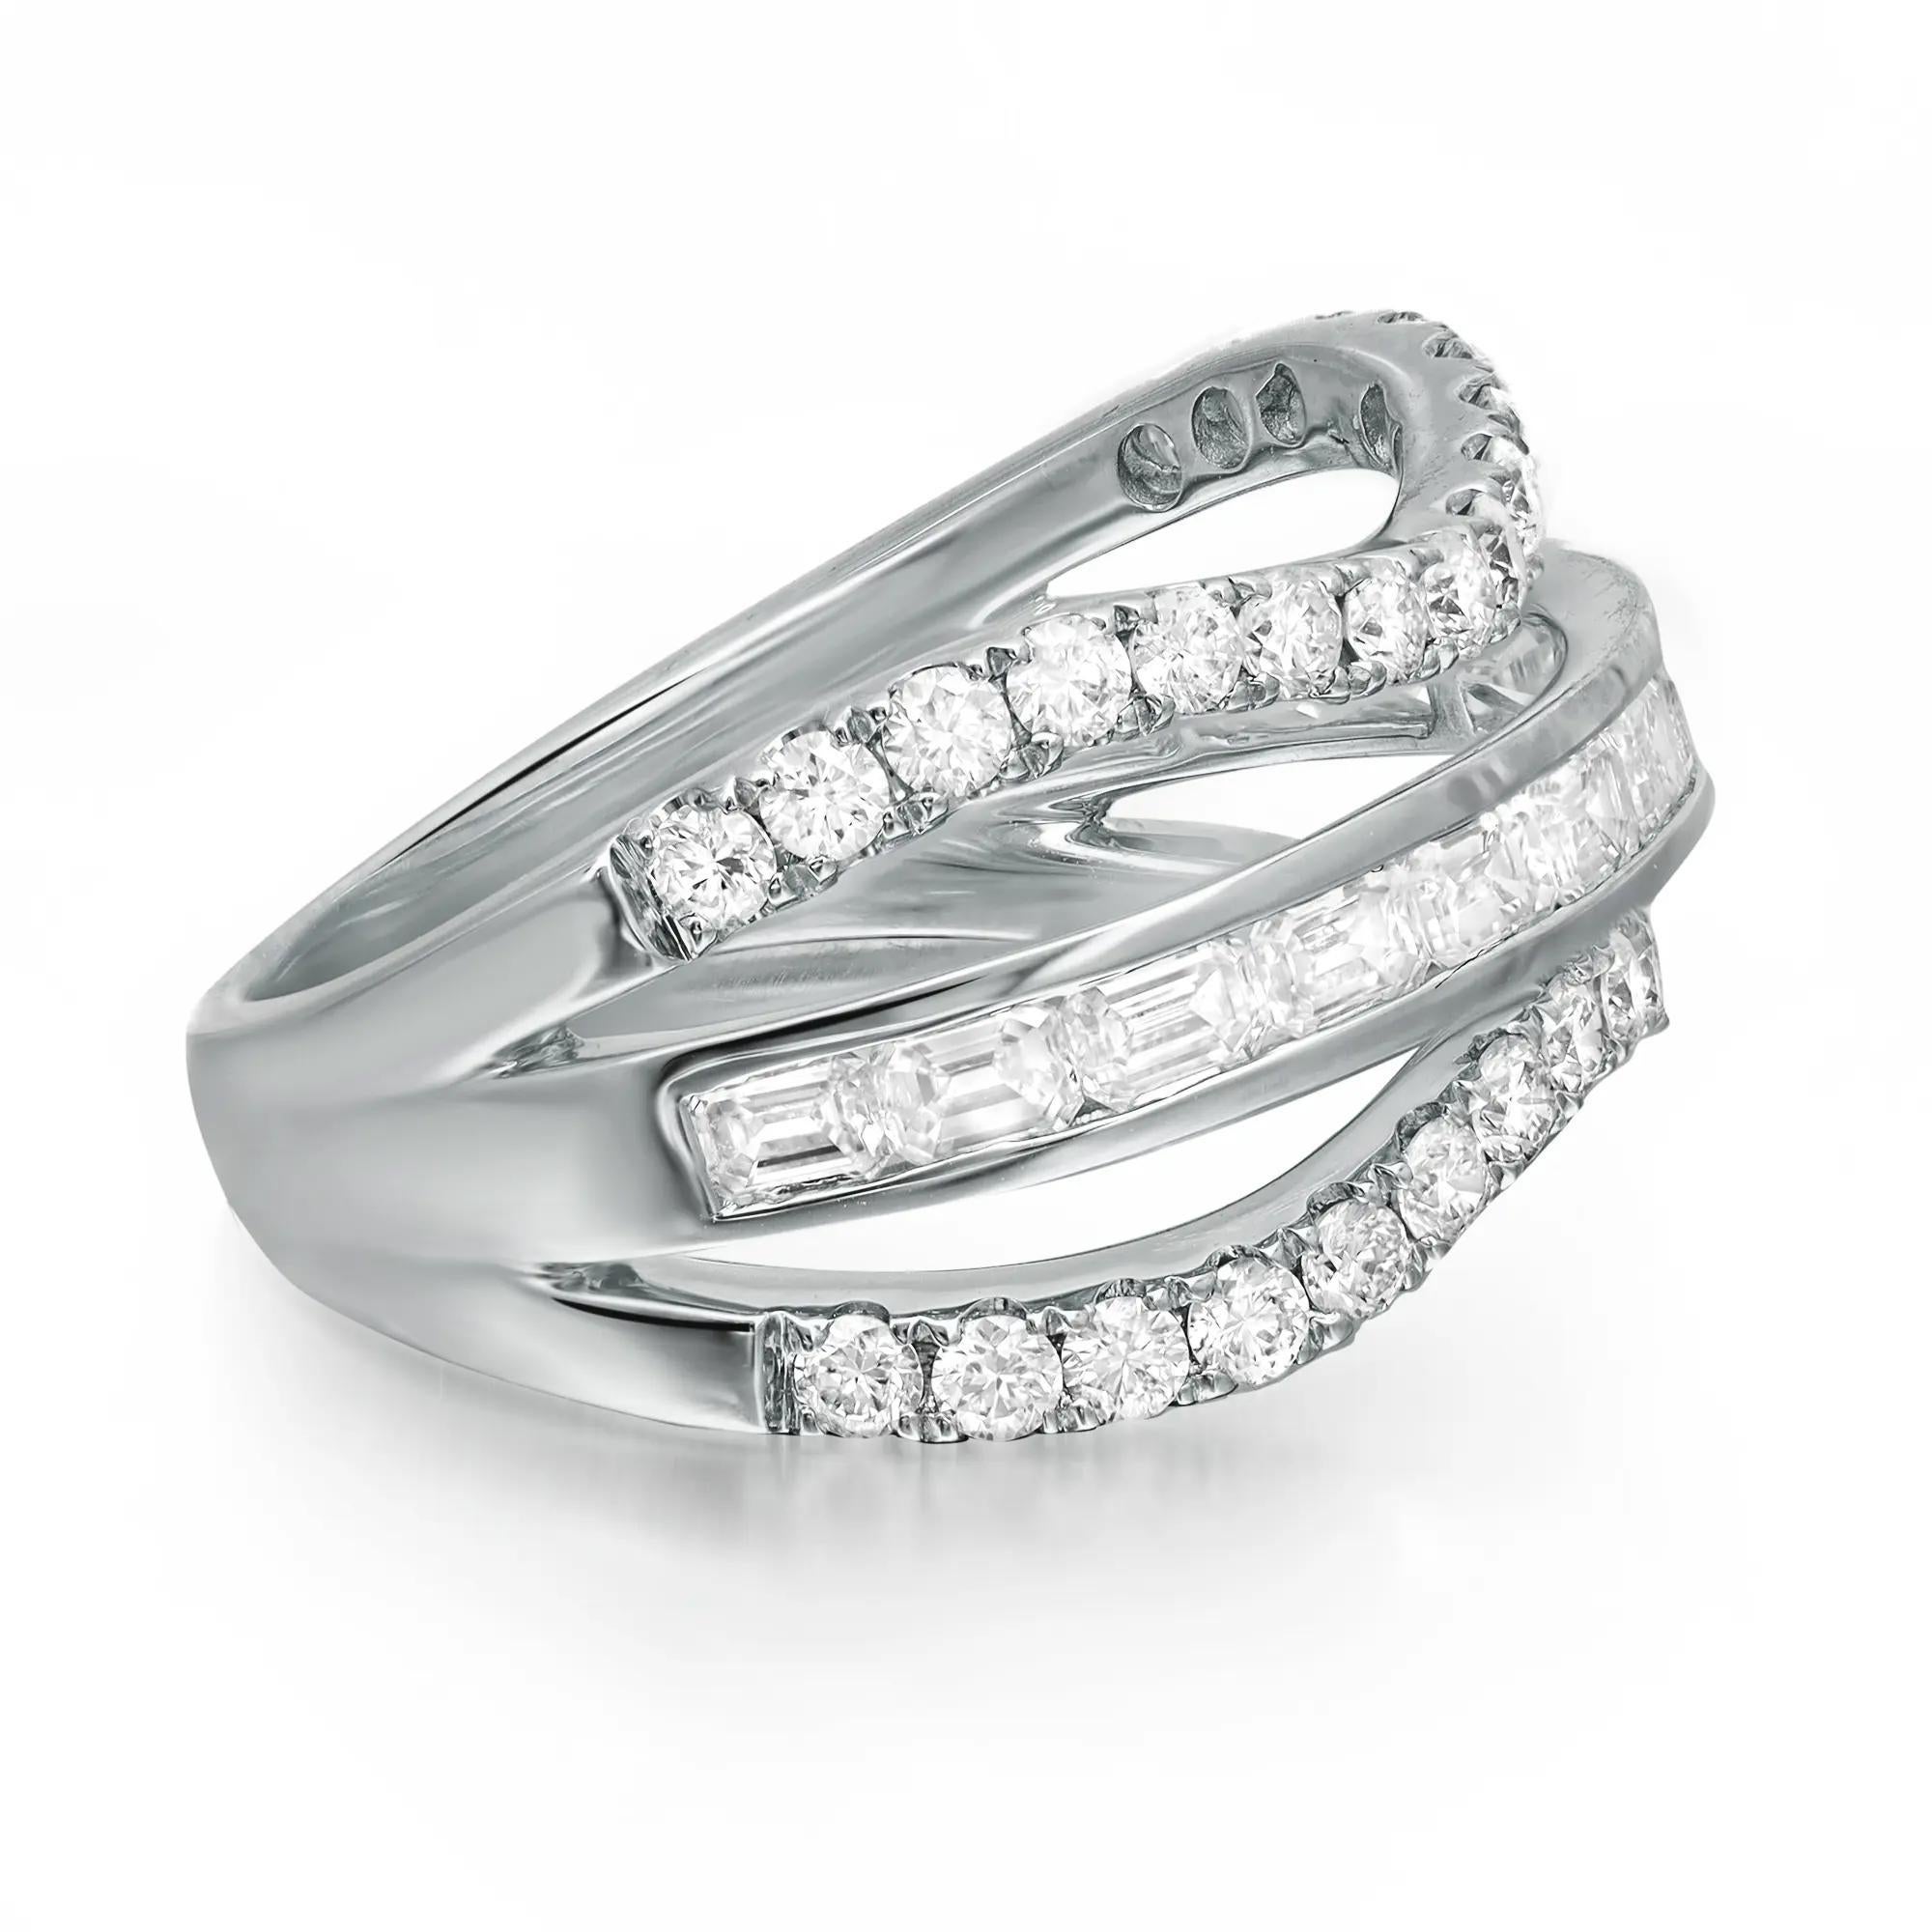 Shimmering and elegant, this diamond band ring is perfect for any occasion. Crafted in lustrous 18K white gold. This beautiful ring is adorned with channel set emerald cut diamonds in the center with two curved rows of round brilliant cut diamonds.